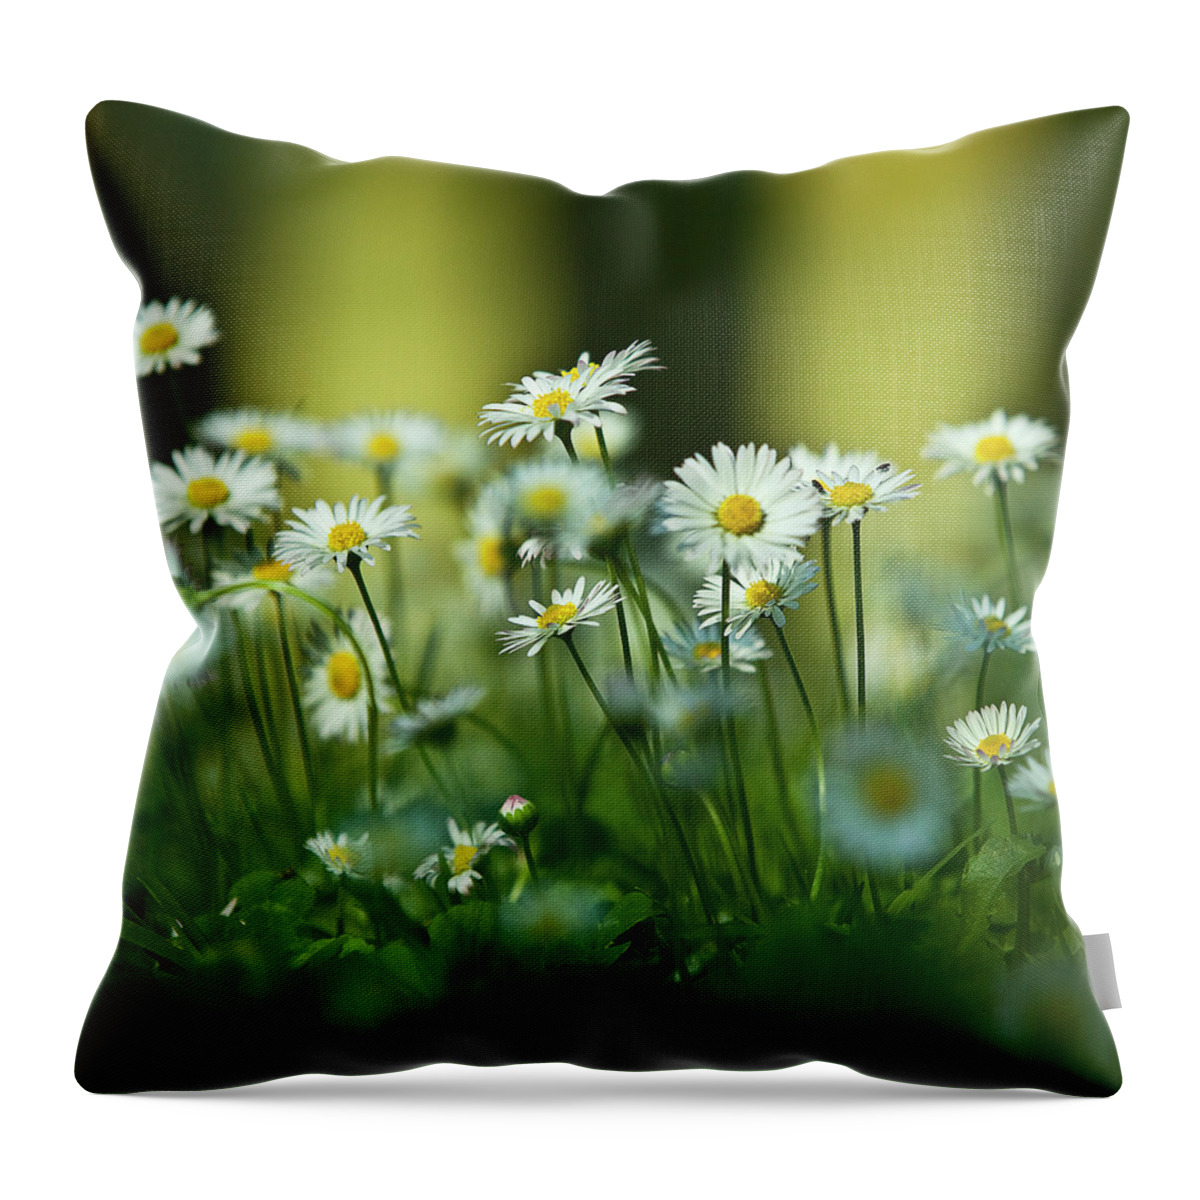 Petal Throw Pillow featuring the photograph Daisy Flowers by Esparkling